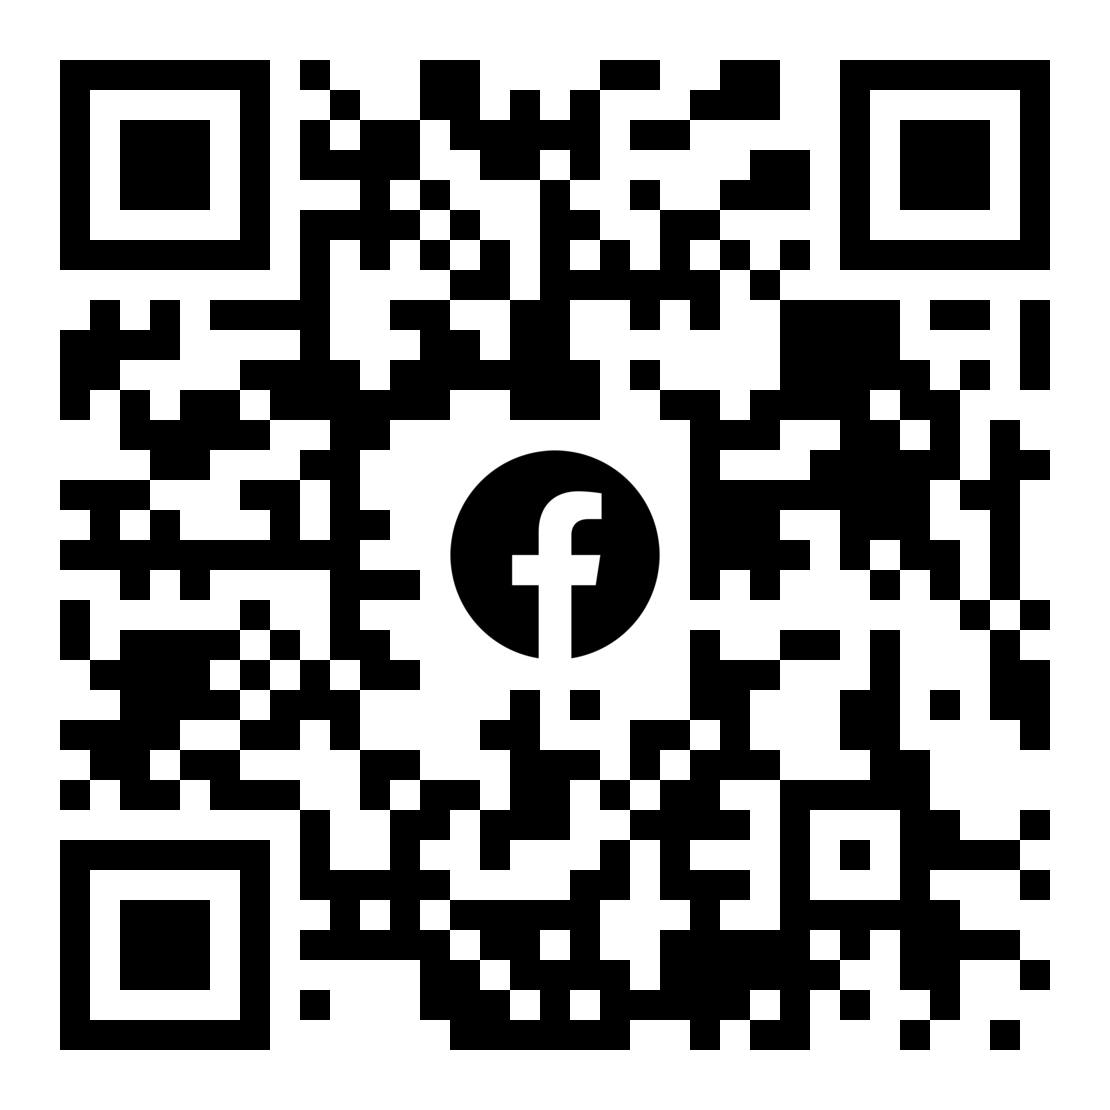 QR code to scan to take you to my Facebook Group called What's Happening Blairsville Georgia. Ask to join